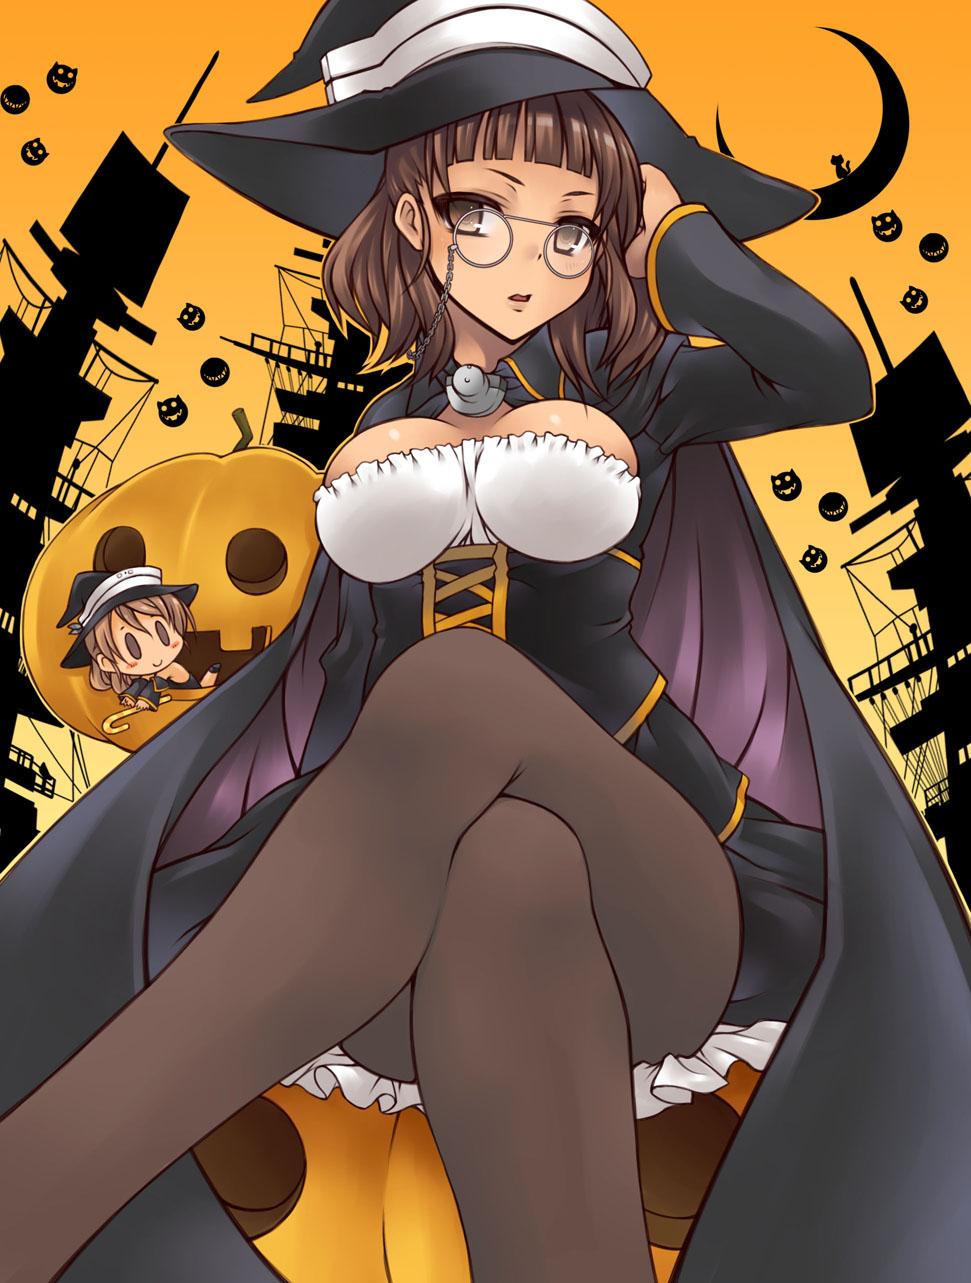 2girls black_legwear blush breasts brown_eyes brown_hair cape crossed_legs glasses halloween halloween_costume hat highres jack-o'-lantern kantai_collection large_breasts littorio_(kantai_collection) long_sleeves looking_at_viewer minigirl multiple_girls nikubanare open_mouth pantyhose pince-nez roma_(kantai_collection) short_hair sitting smile underbust witch_hat